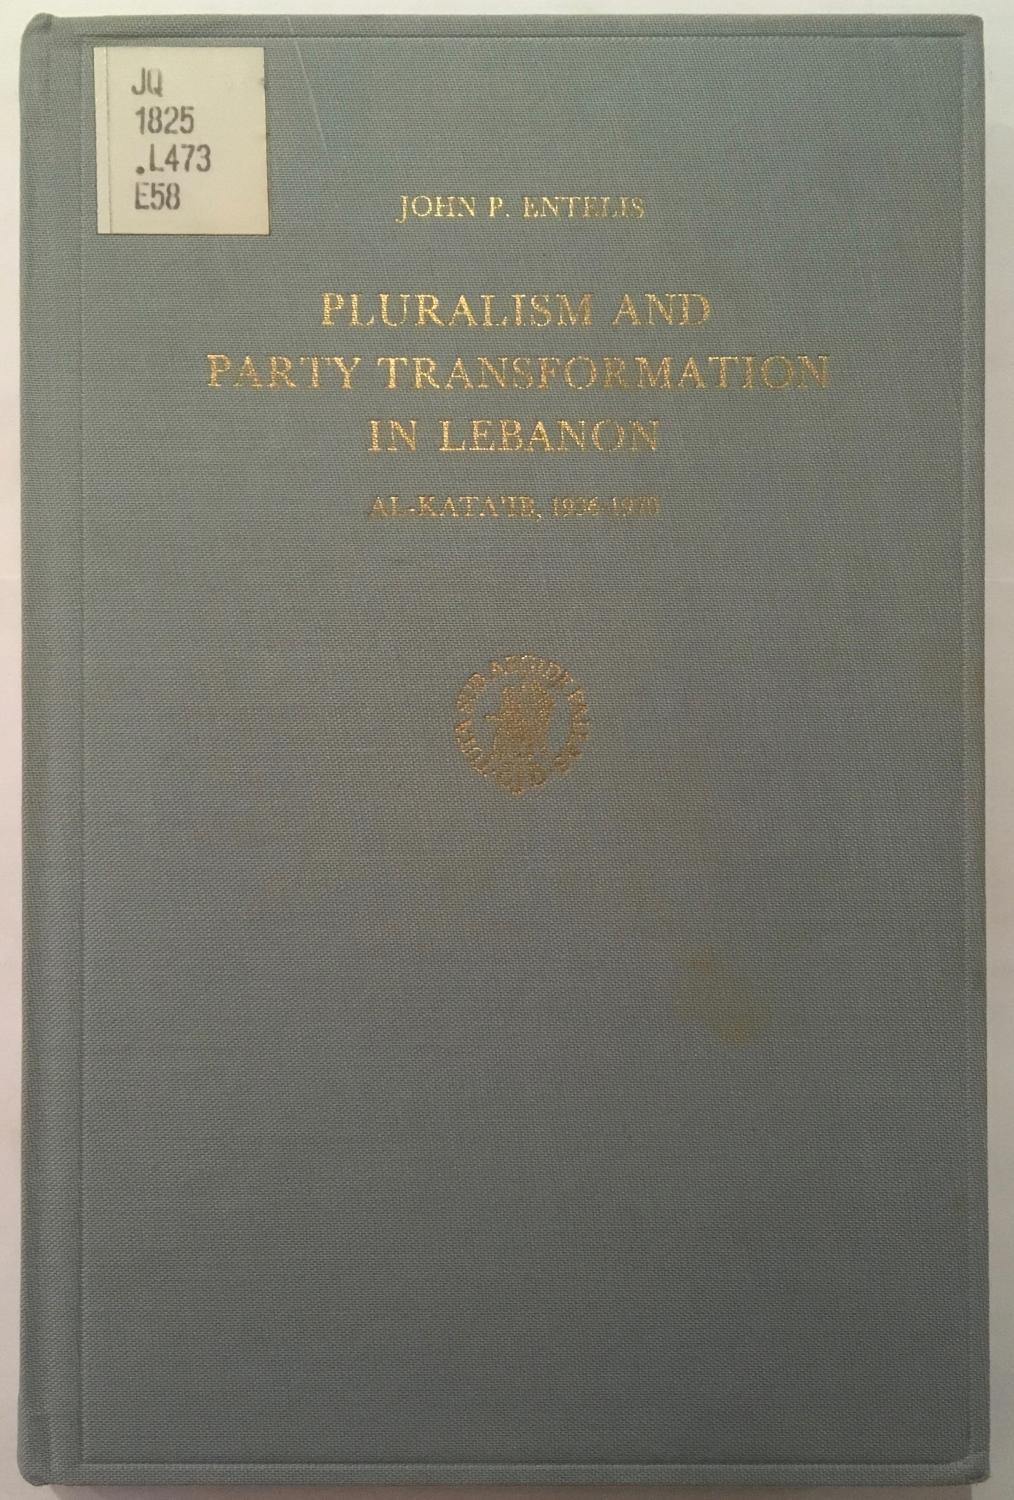 Pluralism and Party Transformation in Lebanon: Al-Kata'ib, 1936-1970 (Social, Economic and Political Studies of the Middle East, v. 10) - John P. Entelis